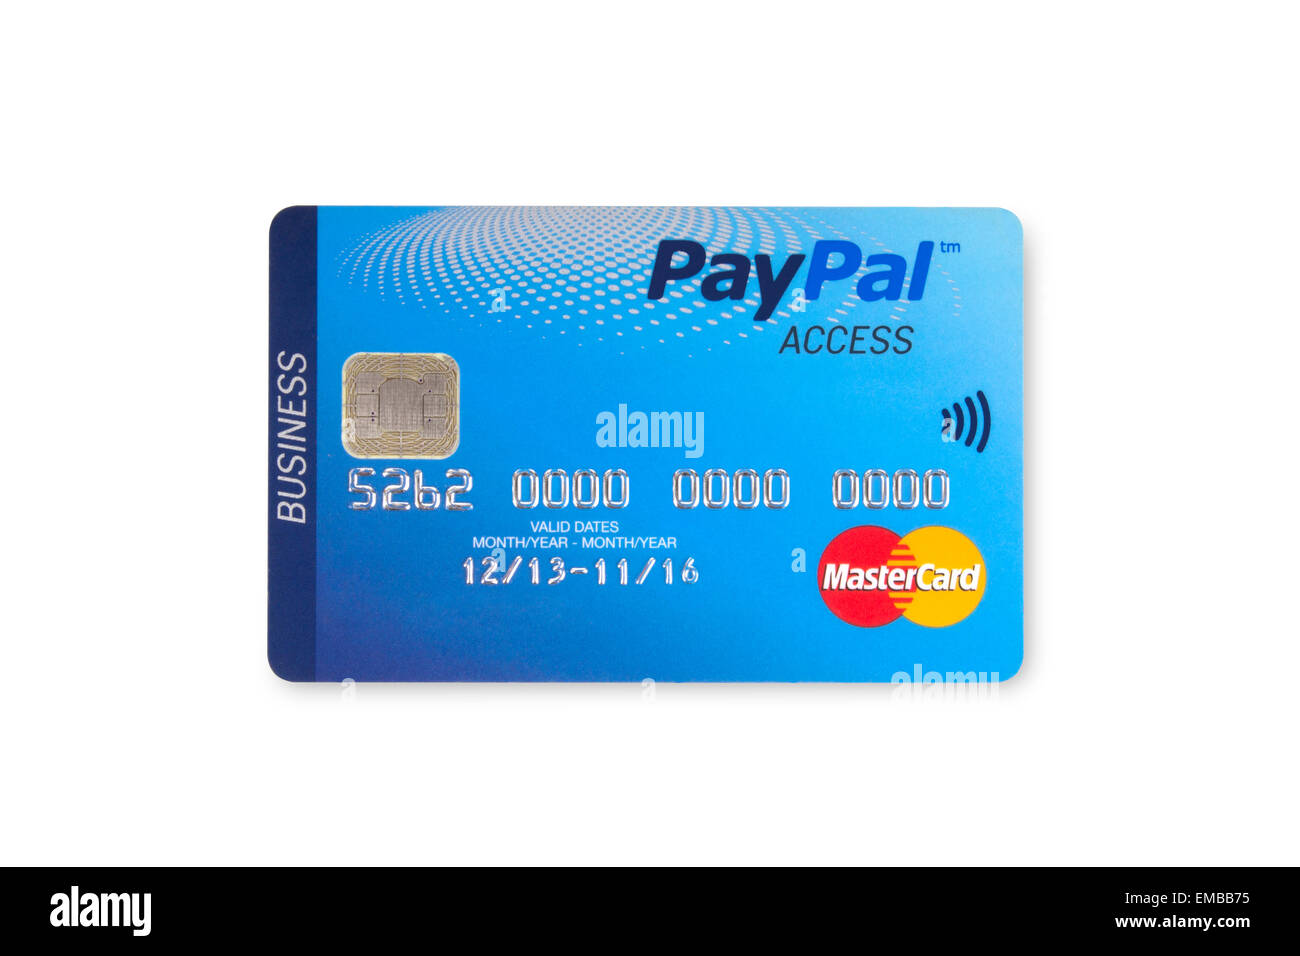 PayPal Business MasterCard on white background Stock Photo, Royalty